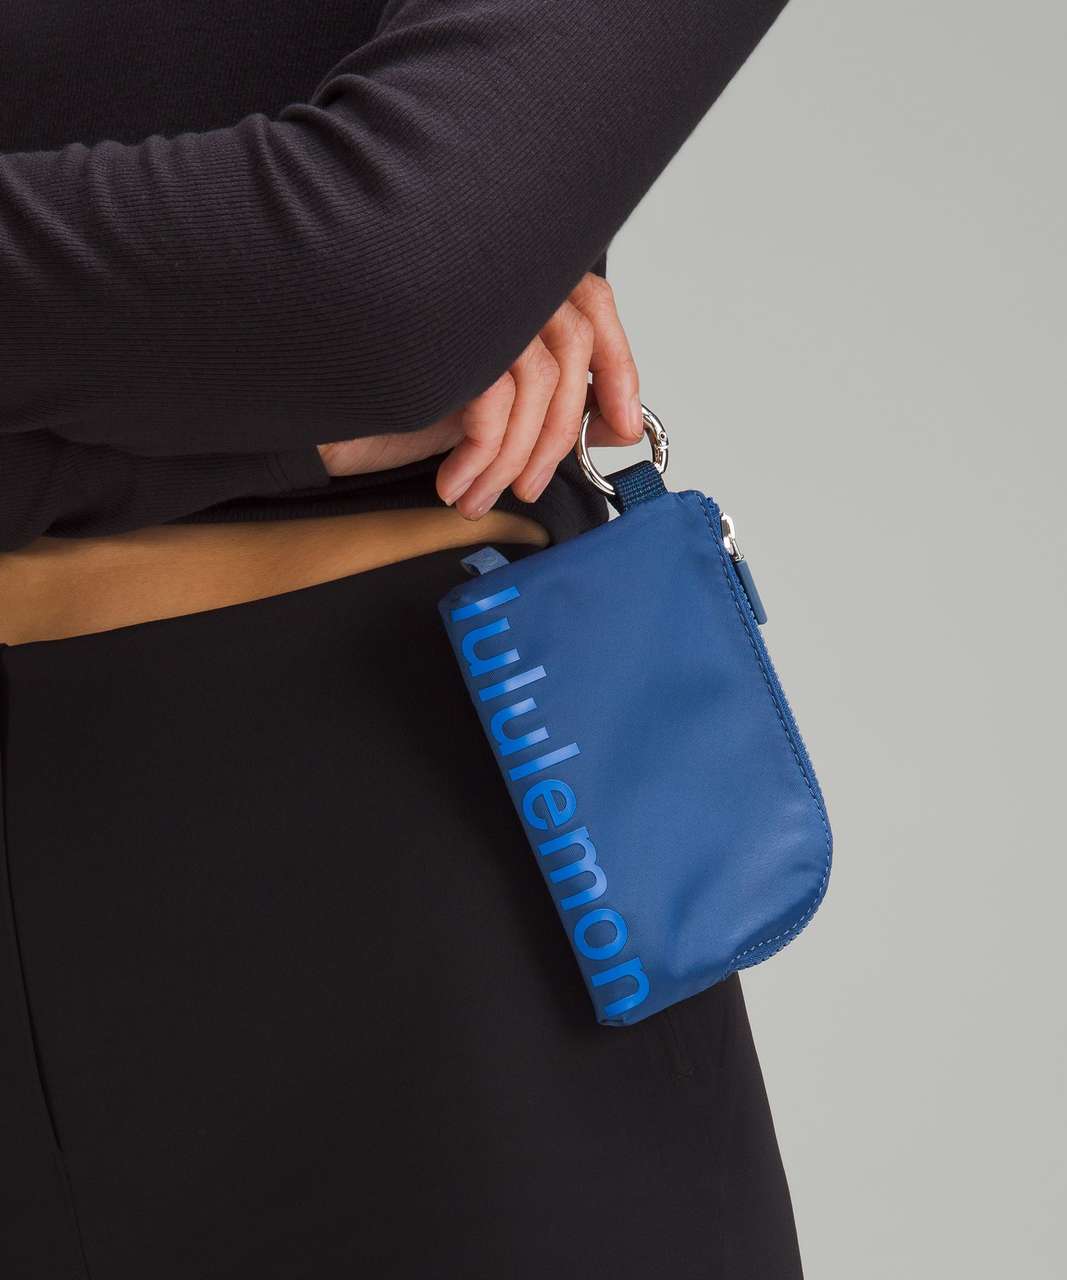 Lululemon Clippable Card Pouch - Pitch Blue / Pipe Dream Blue